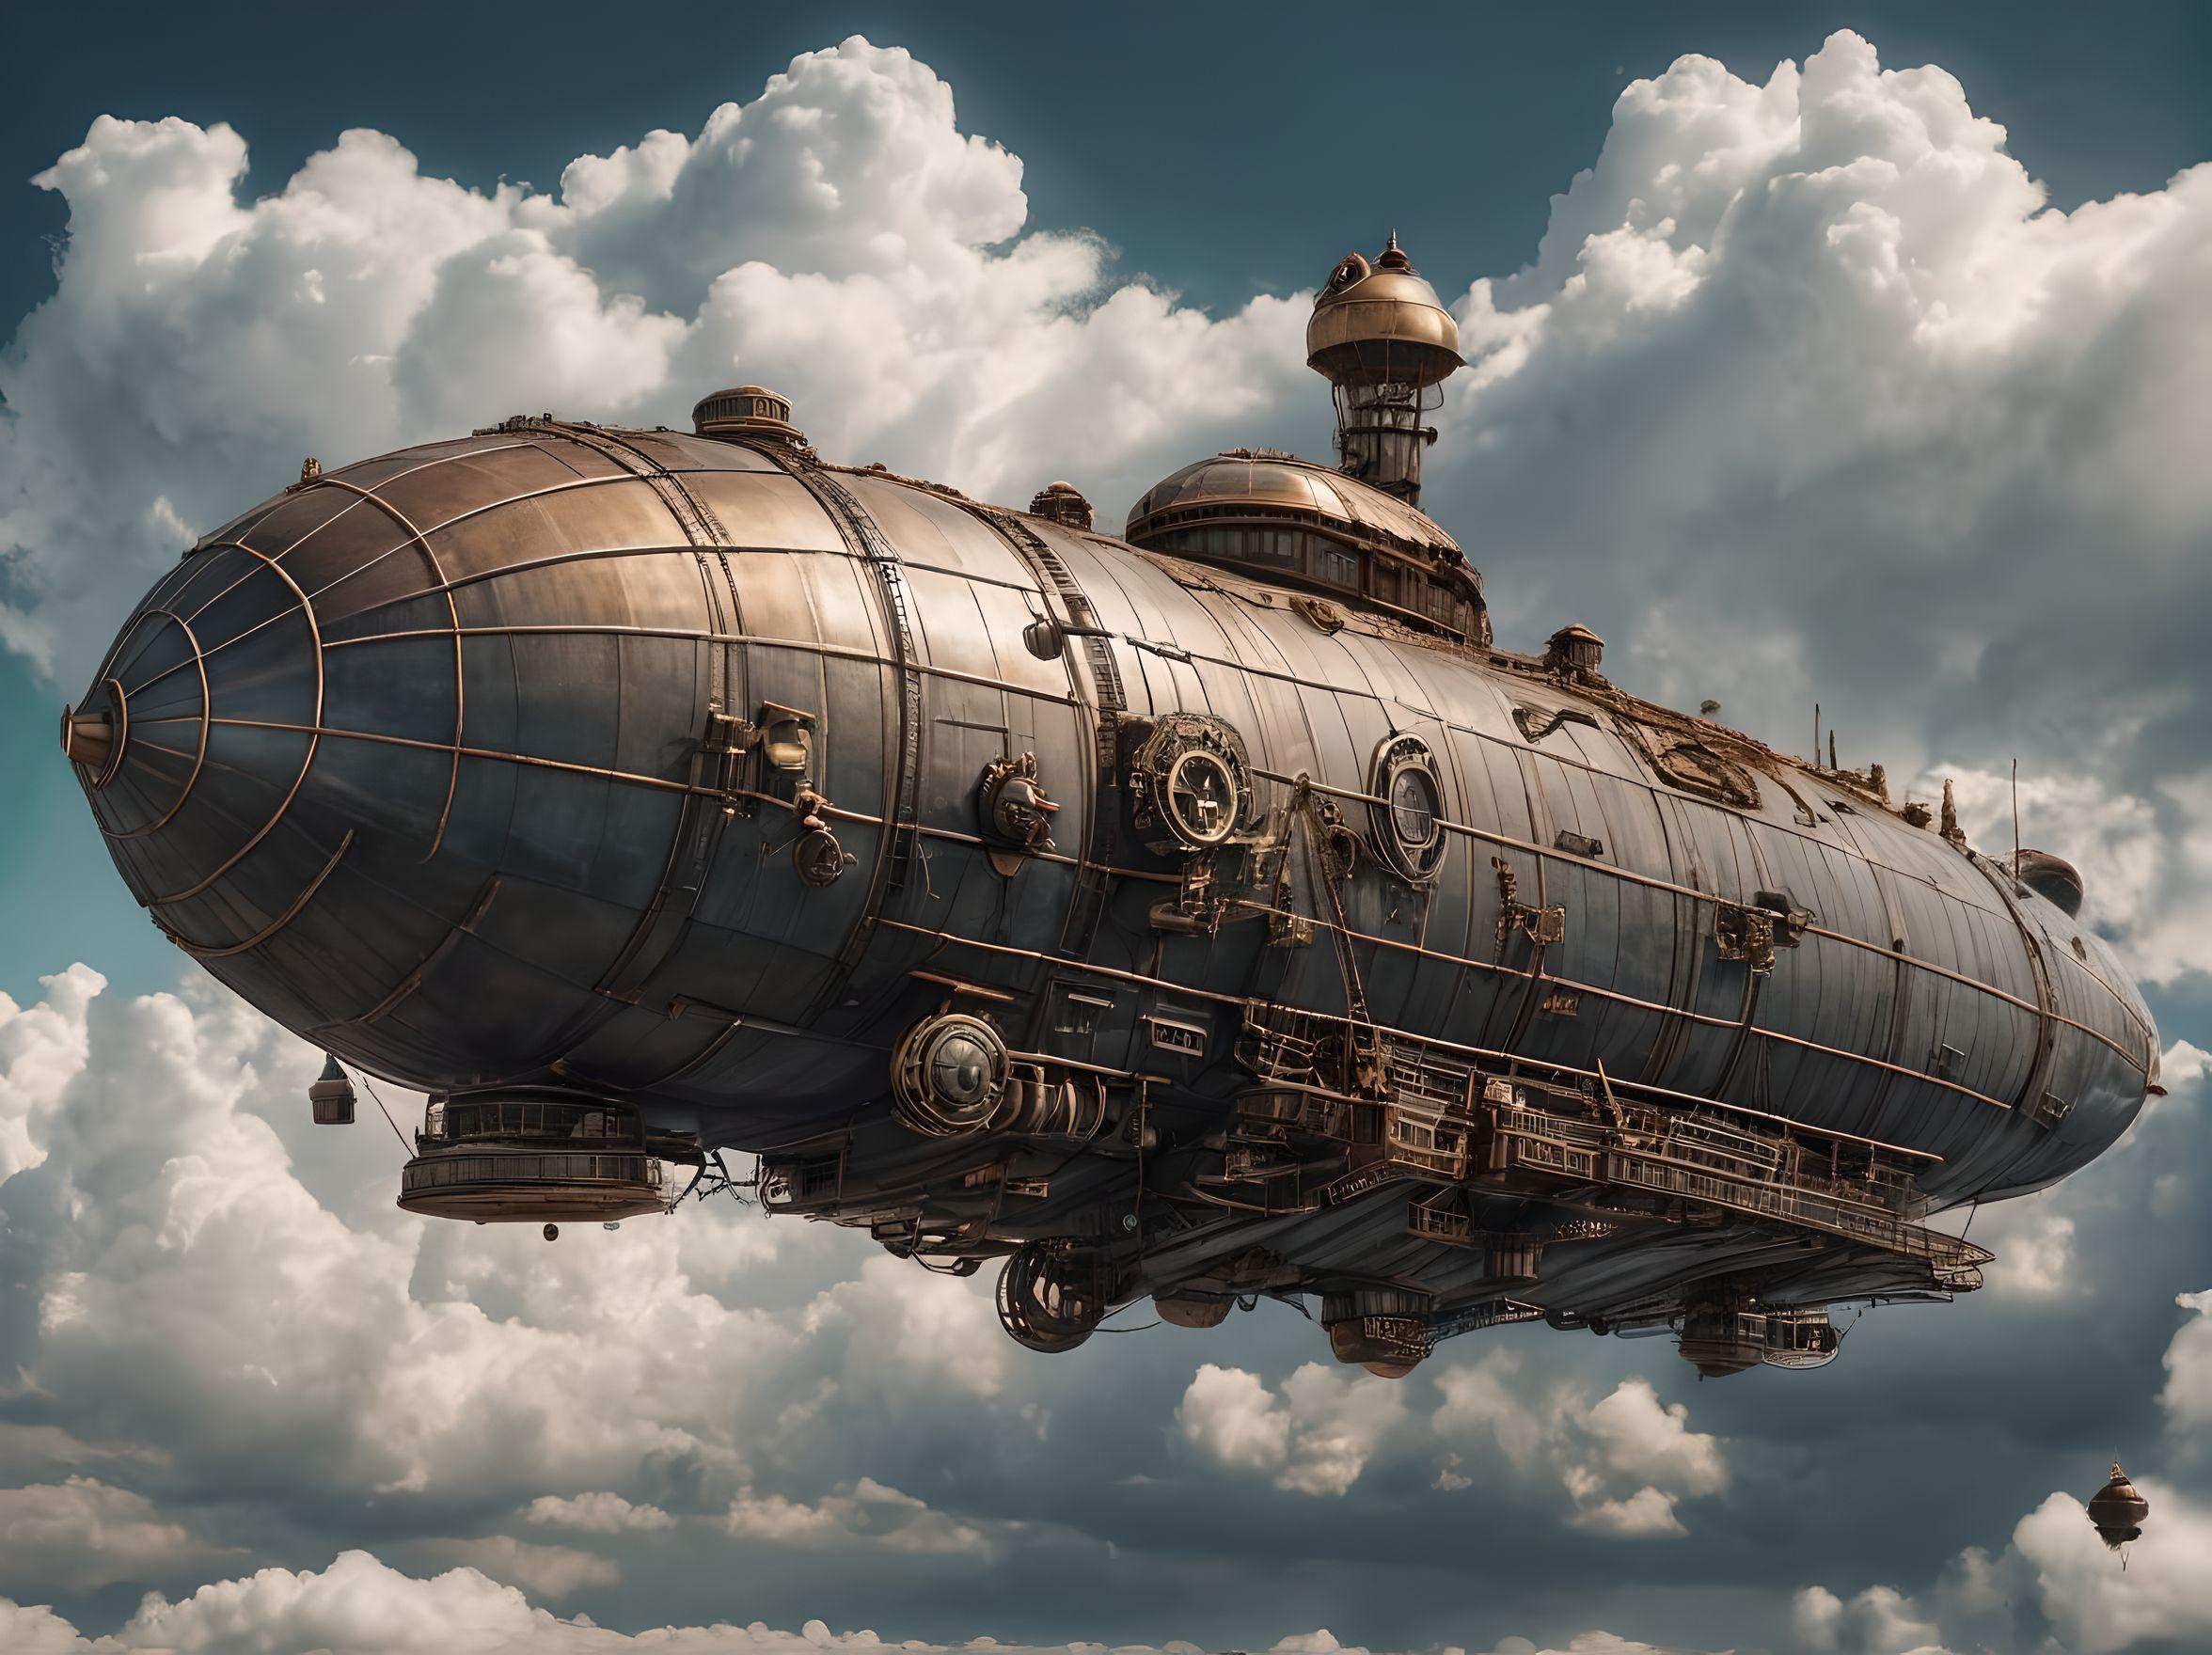 steampunk flying blimp warship in the clouds


